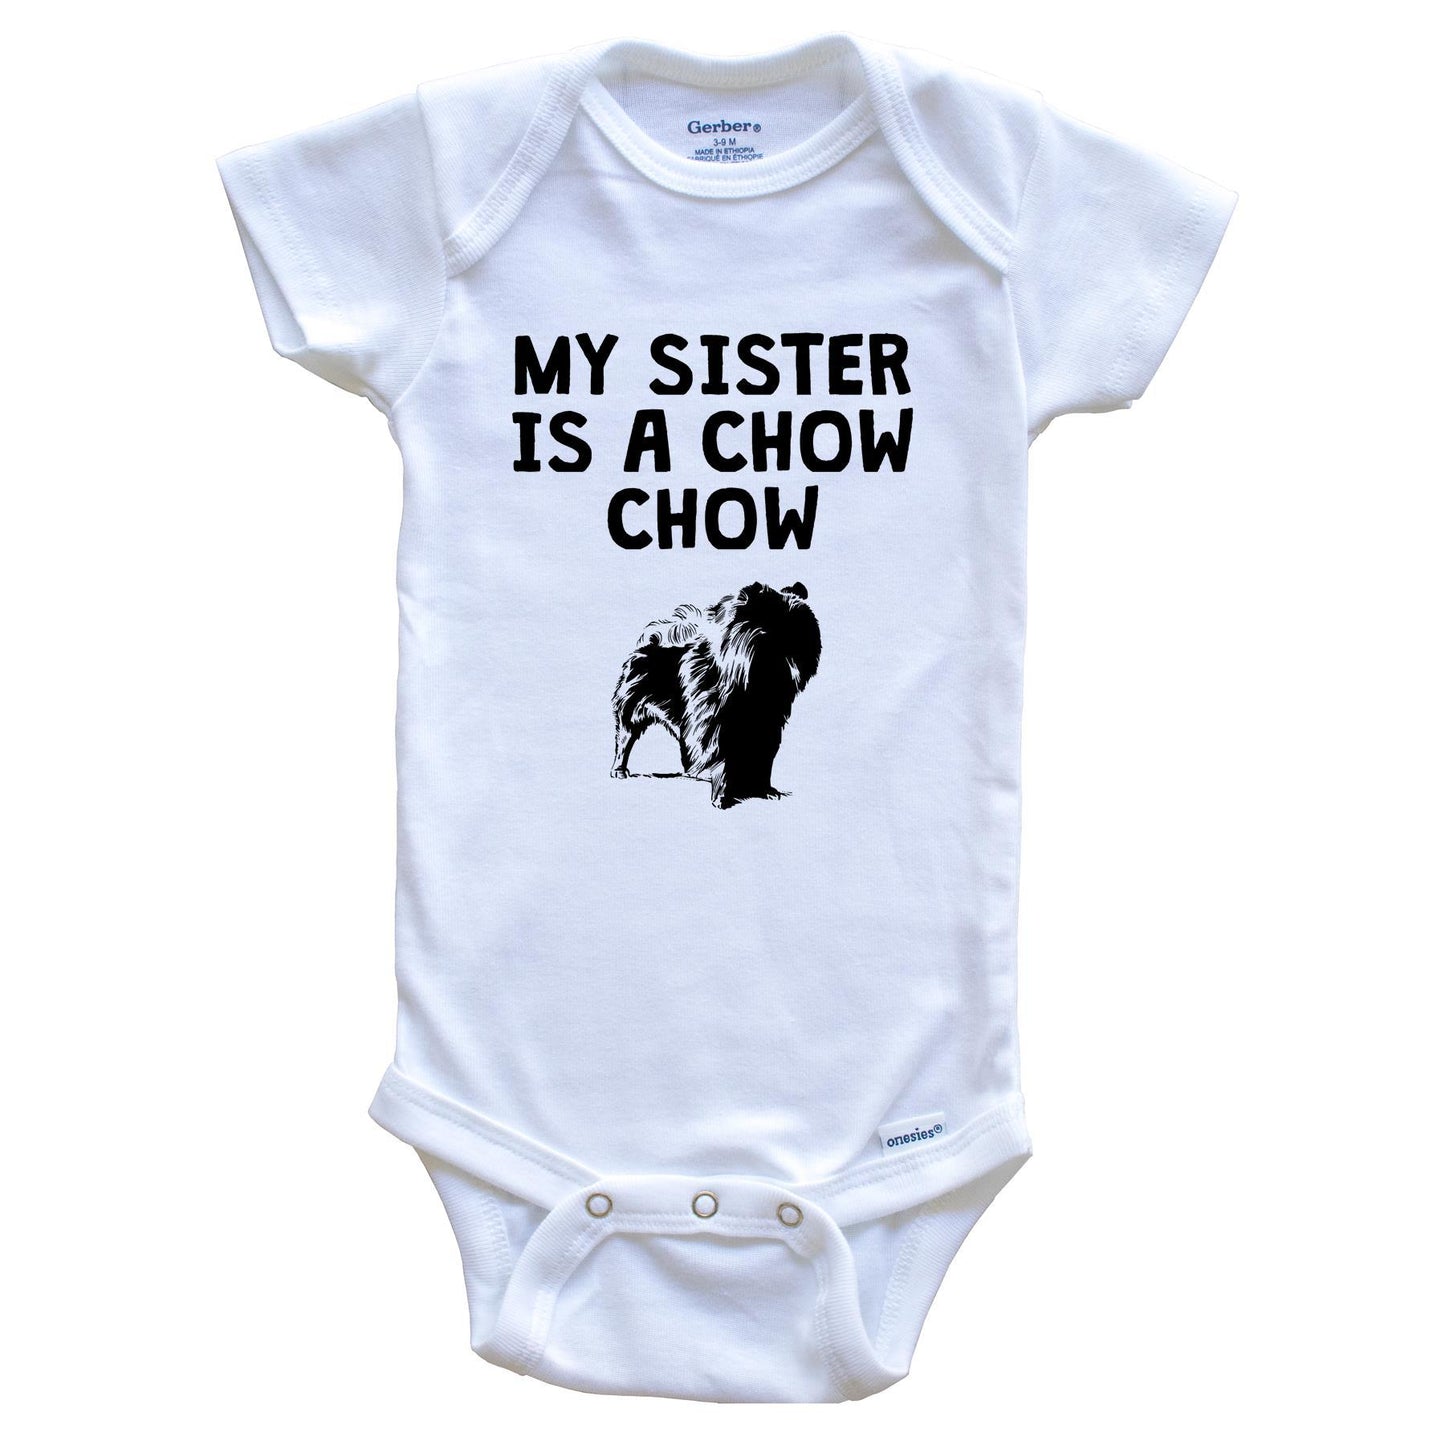 My Sister Is A Chow Chow Baby Onesie